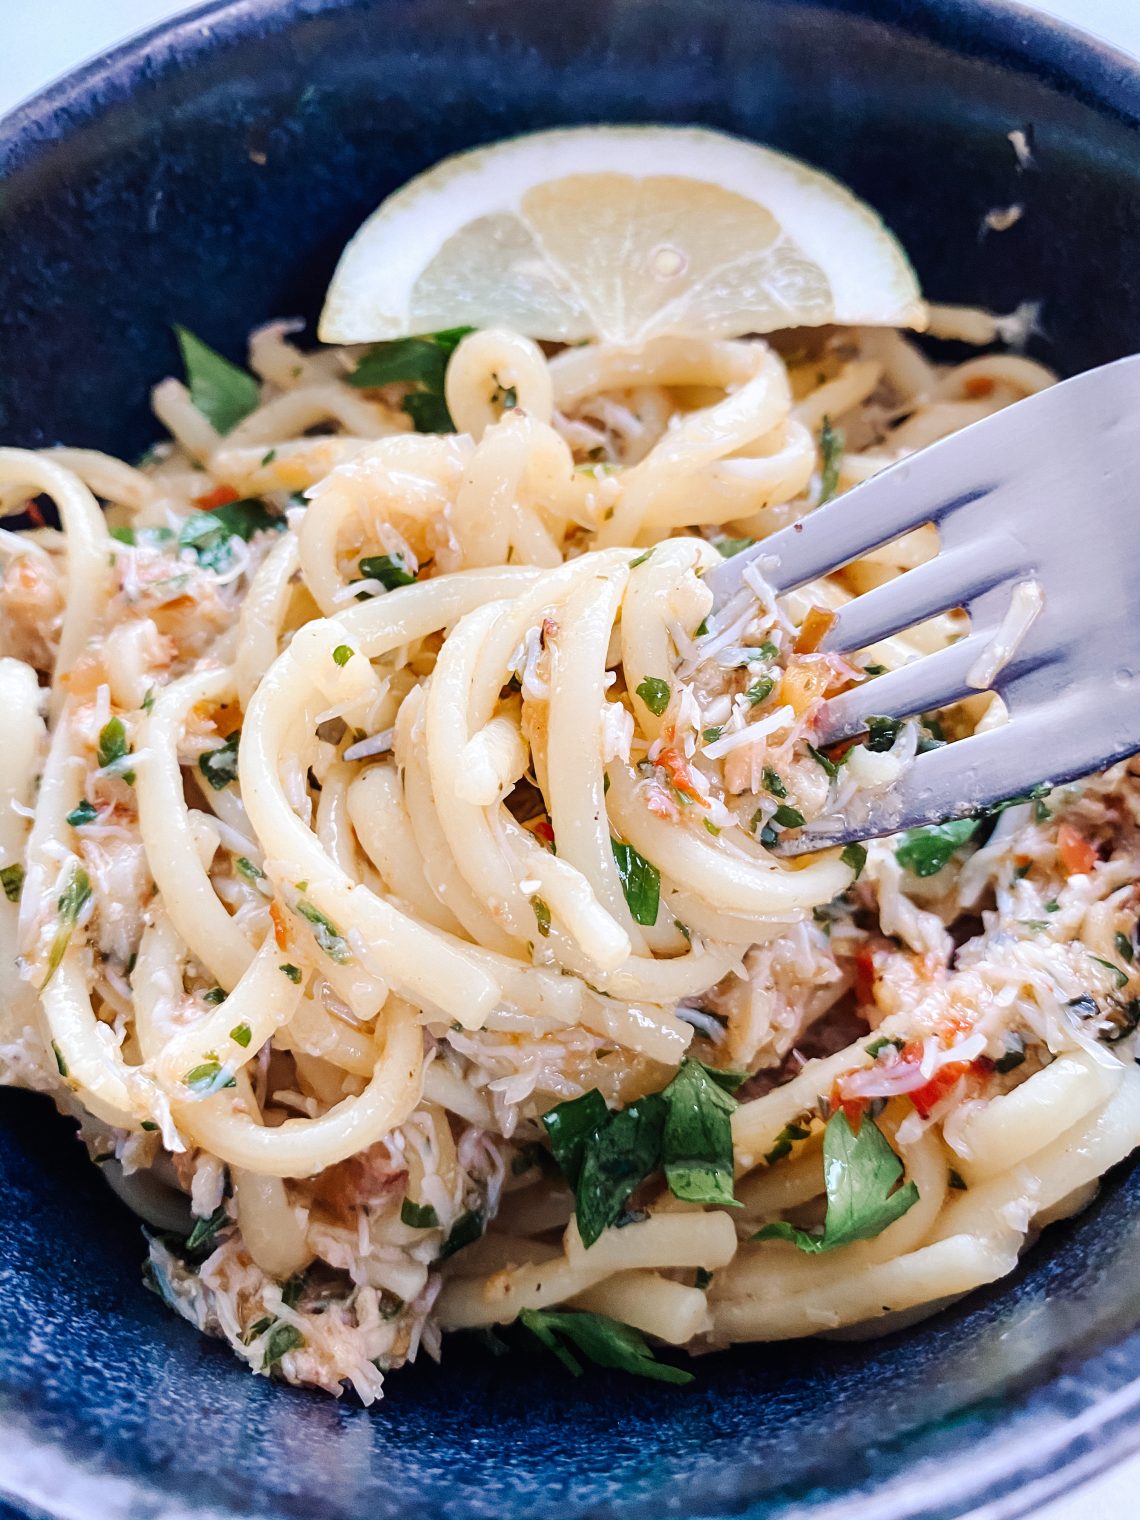 Photograph of Crab Pasta with Tomatoes, Garlic, Chilli and Lemon